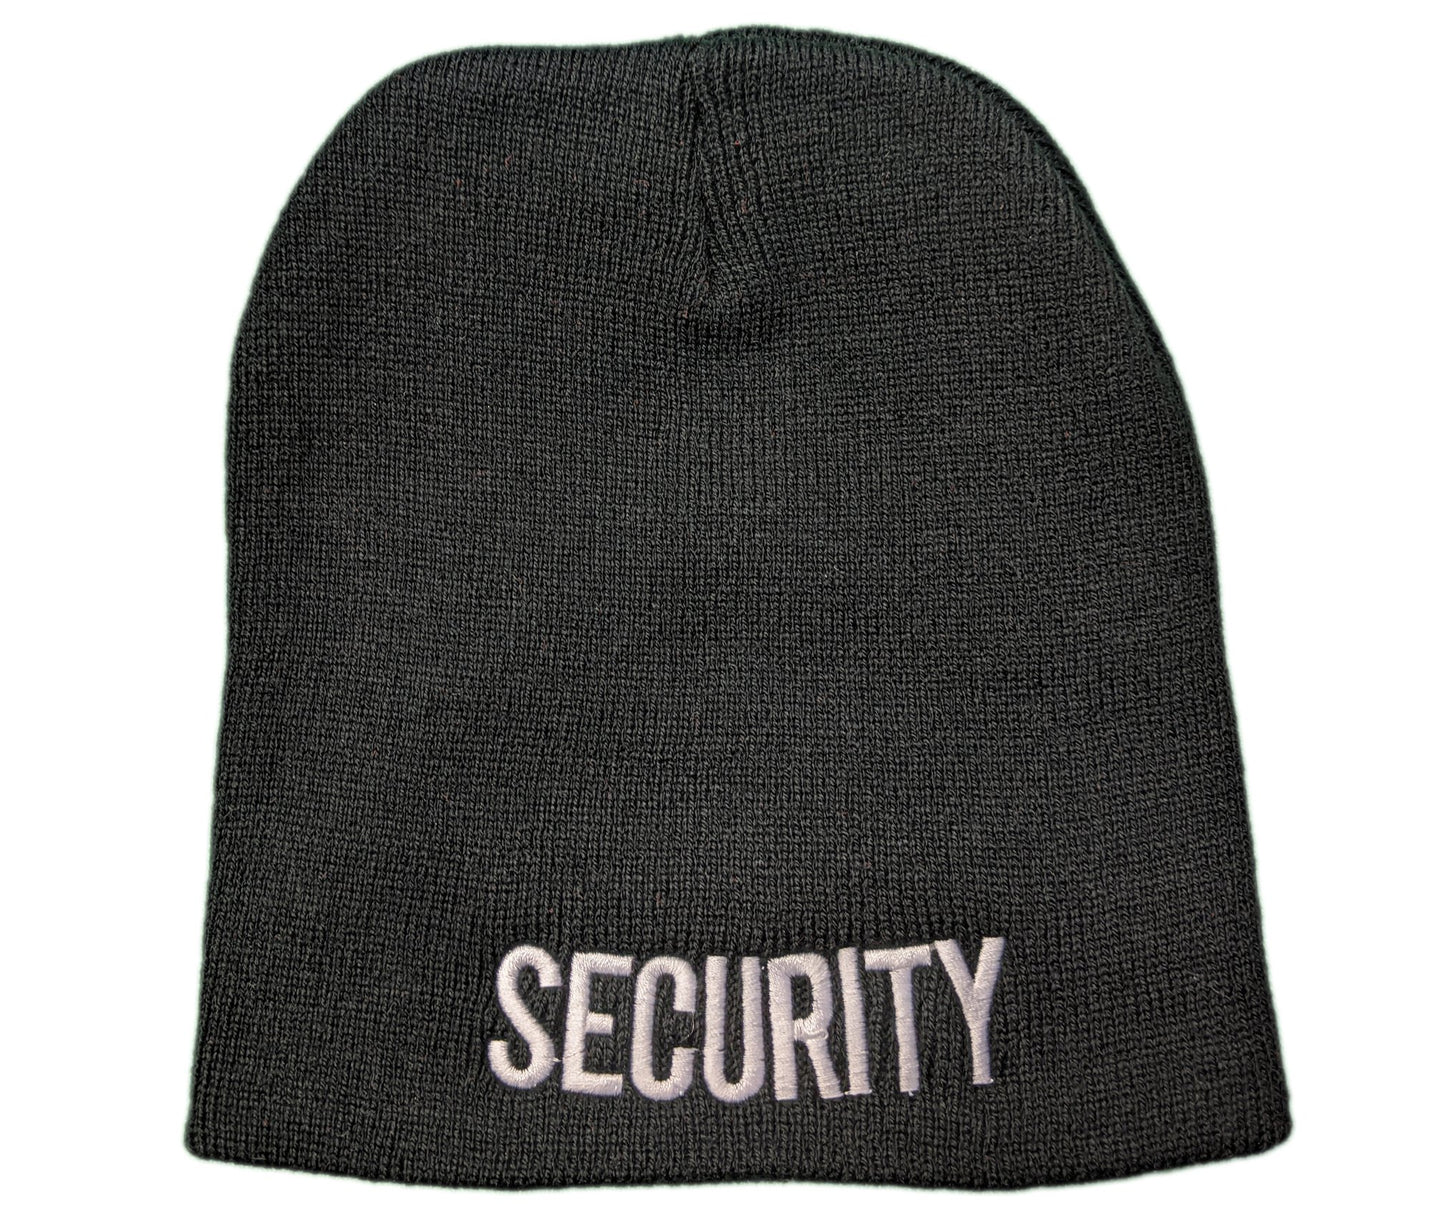 Men's Security Knit Cap Beanie USA Embroidered Winter Hat